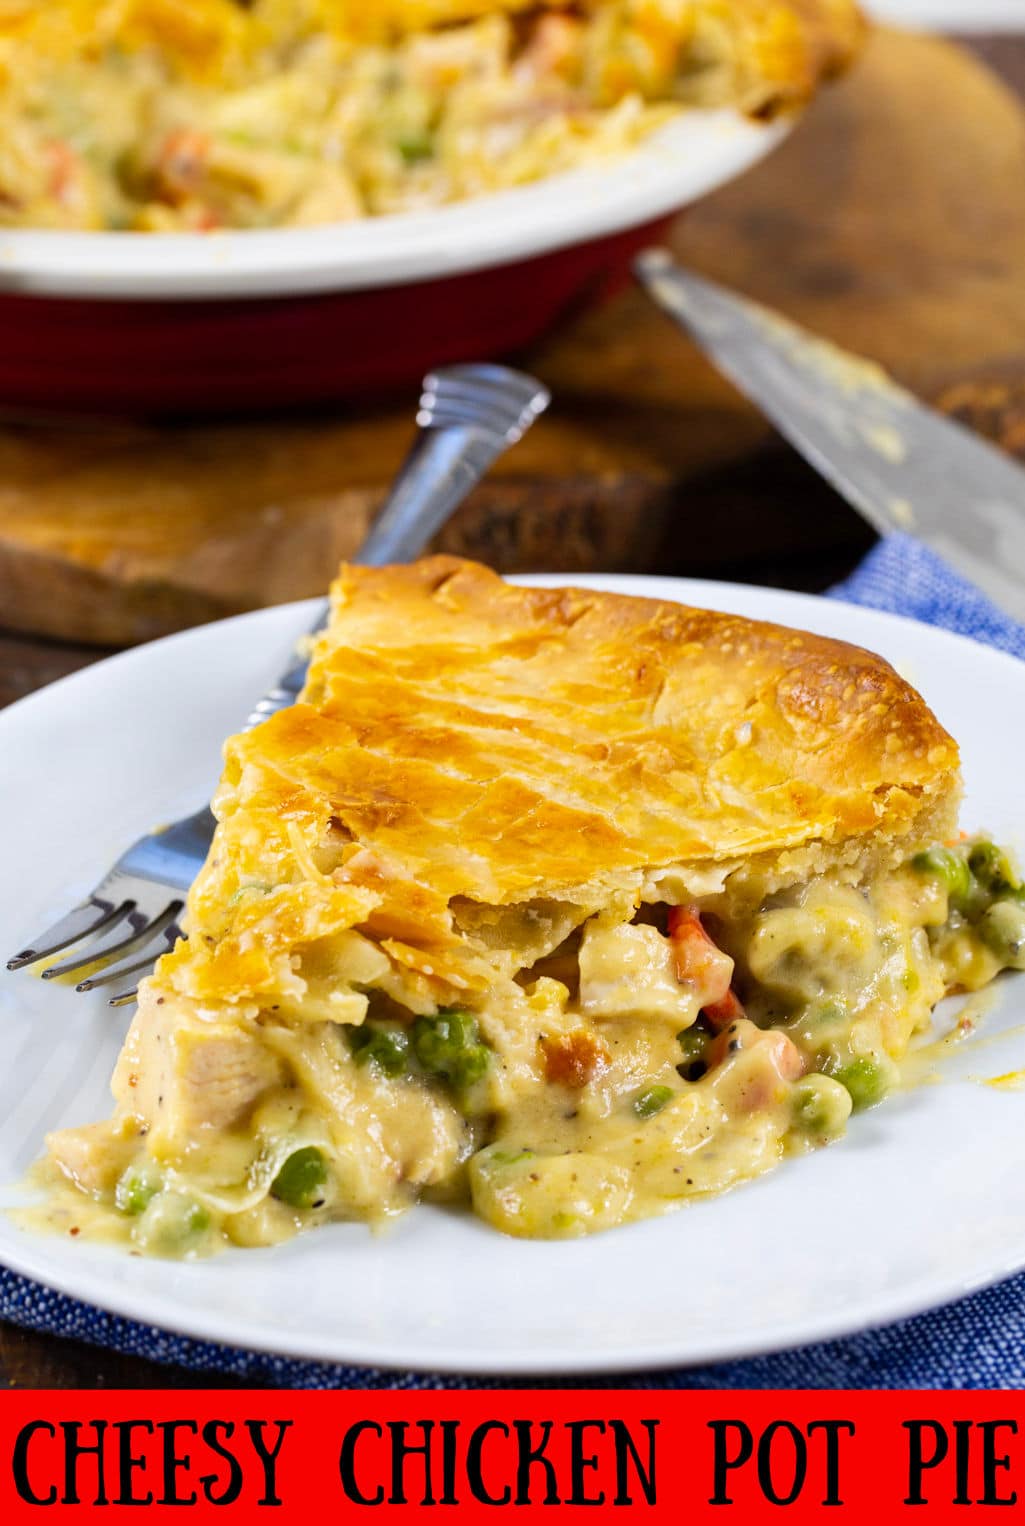 Slice of Cheesy Chicken Pot Pie on a plate.